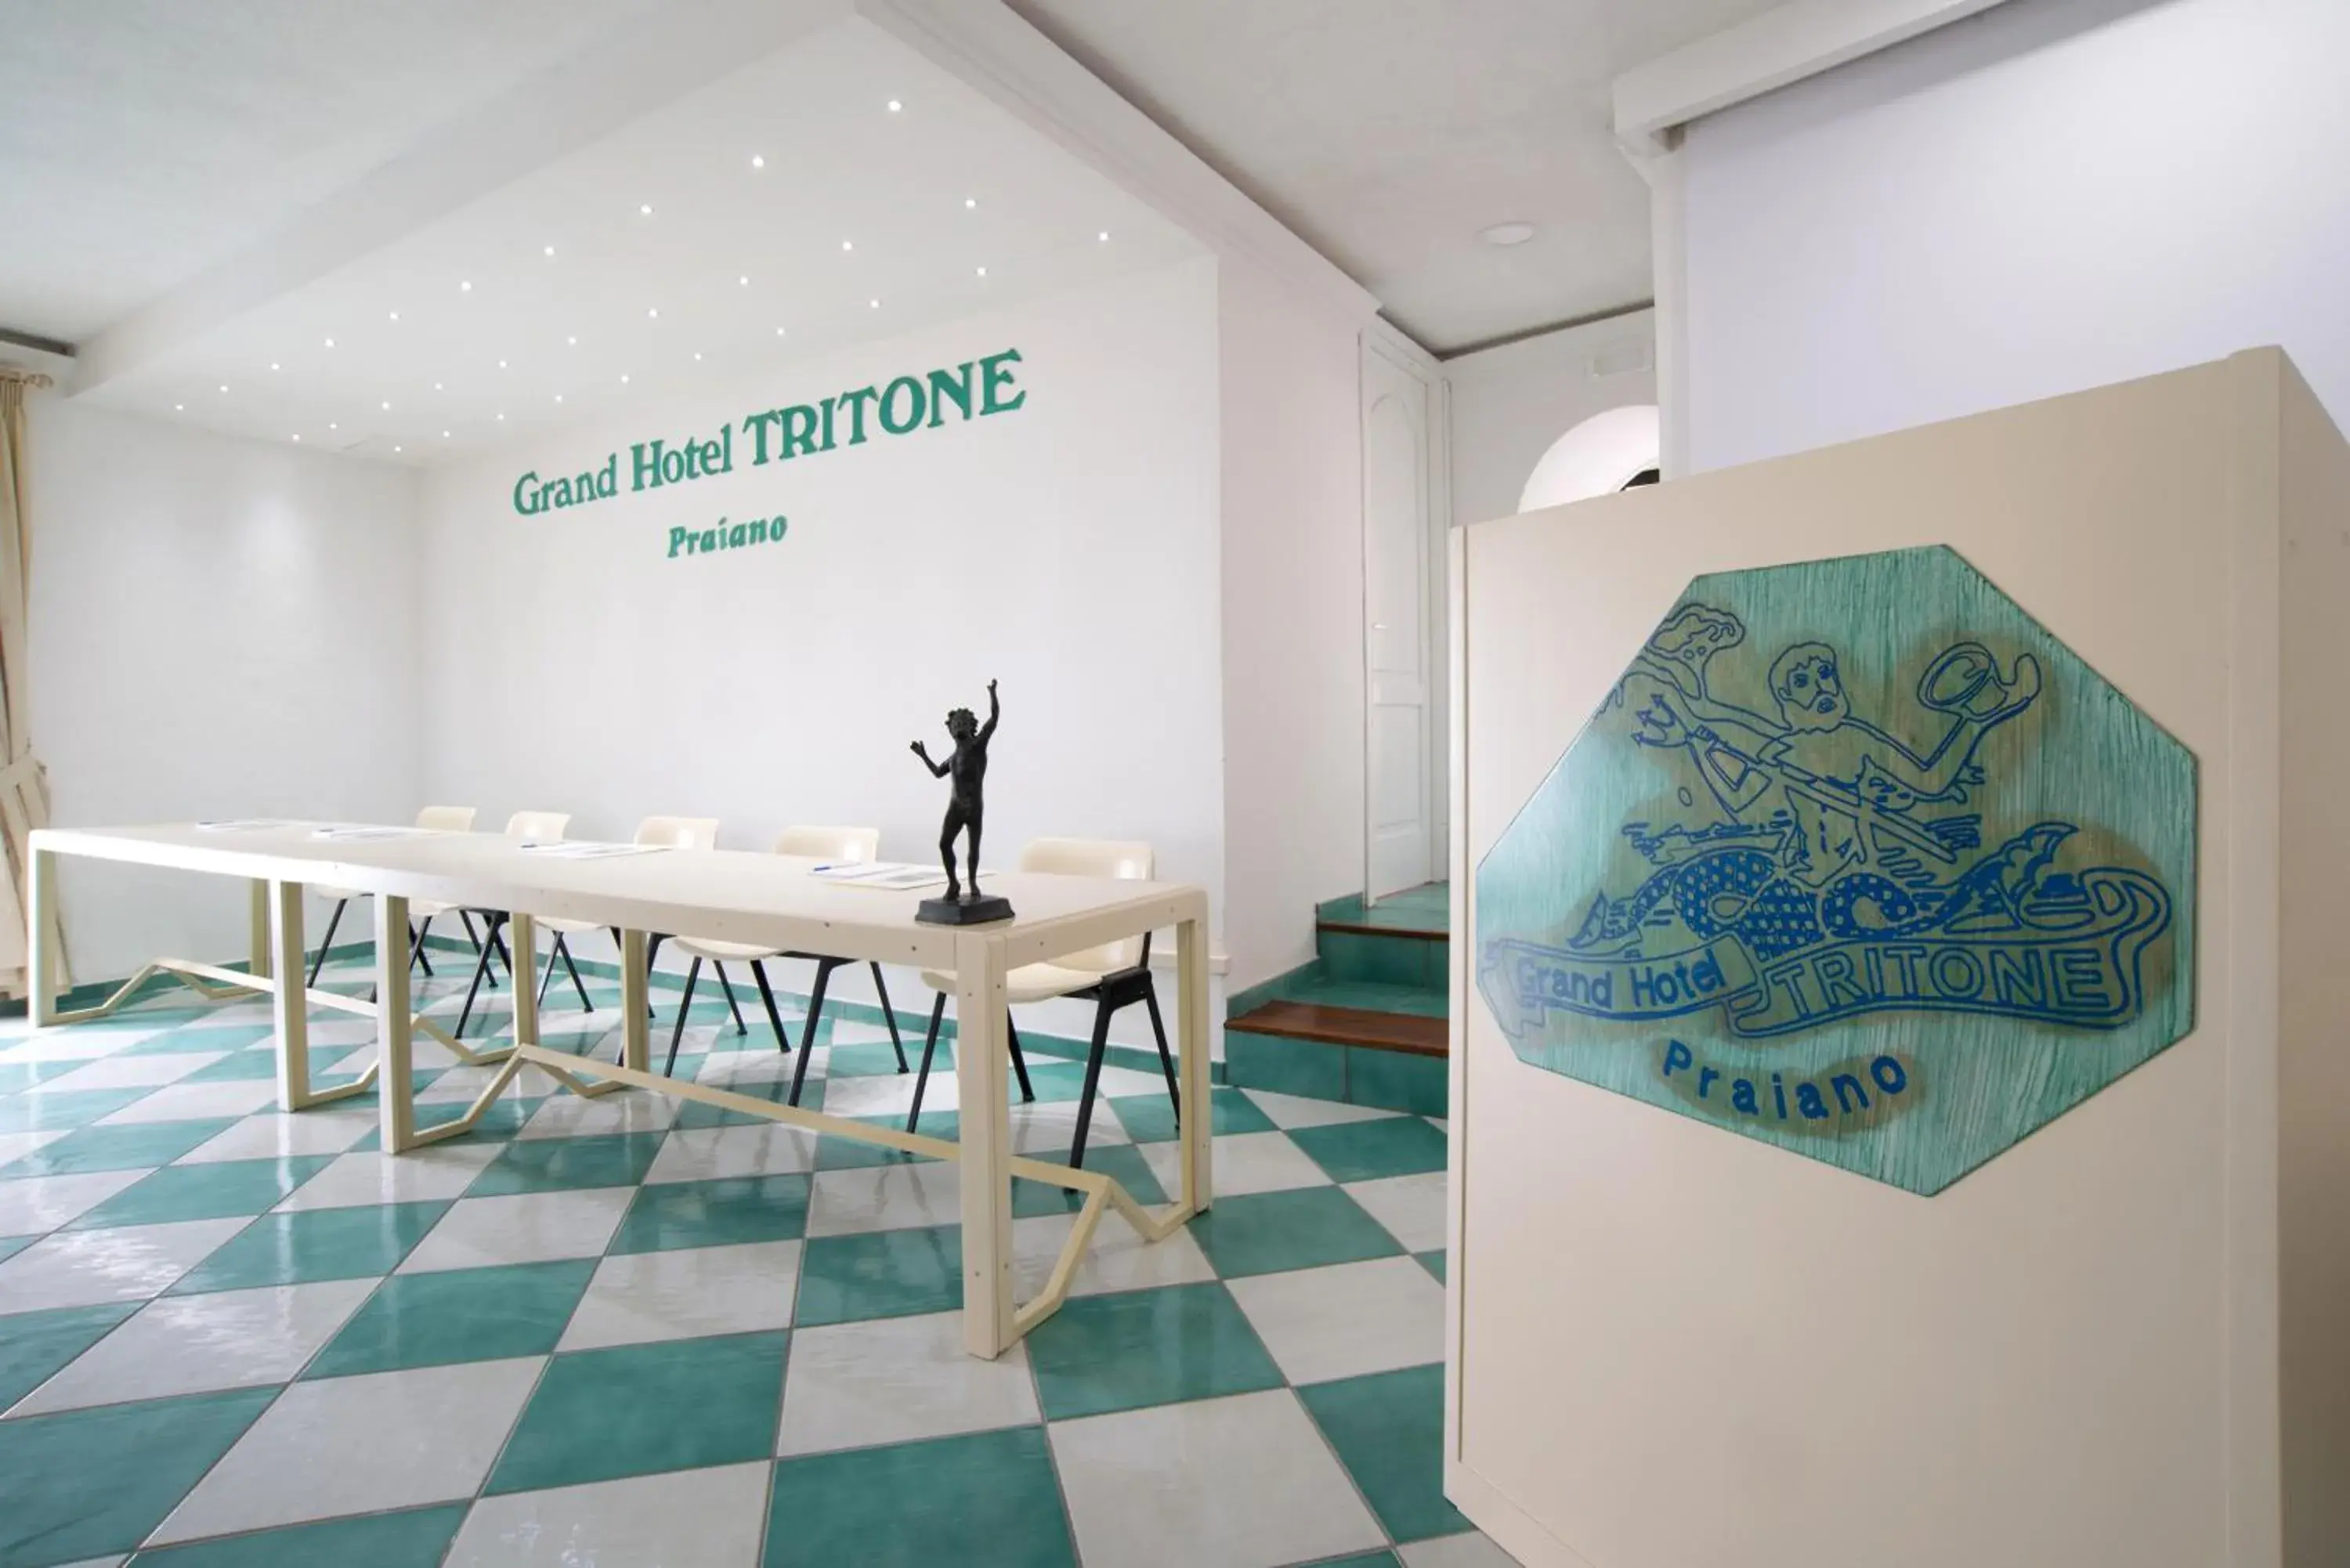 Meeting/conference room, Dining Area in Grand Hotel Tritone